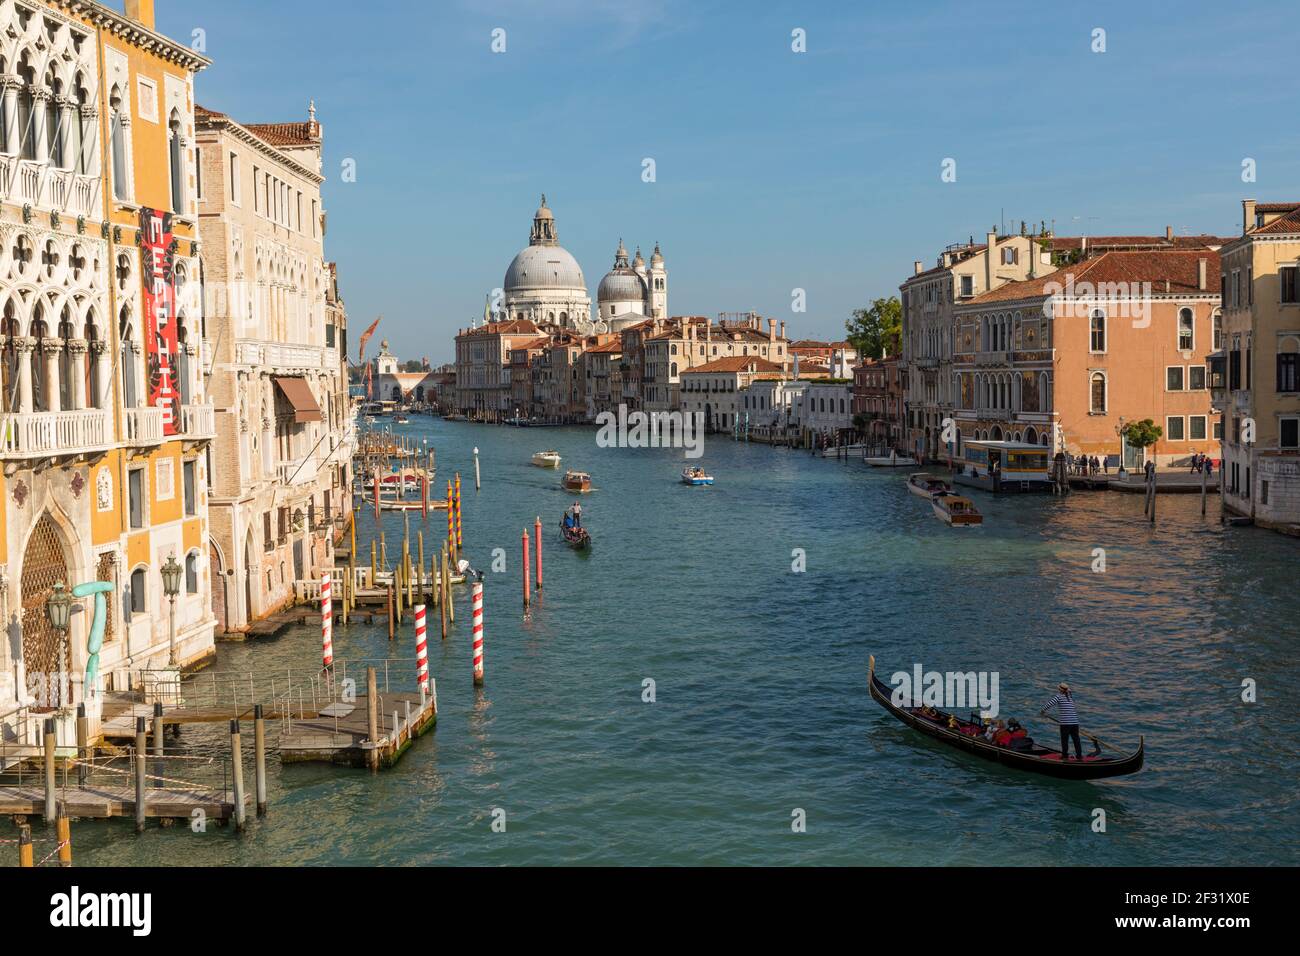 Italy,Venice, gondolier on the Grand Canal Stock Photo